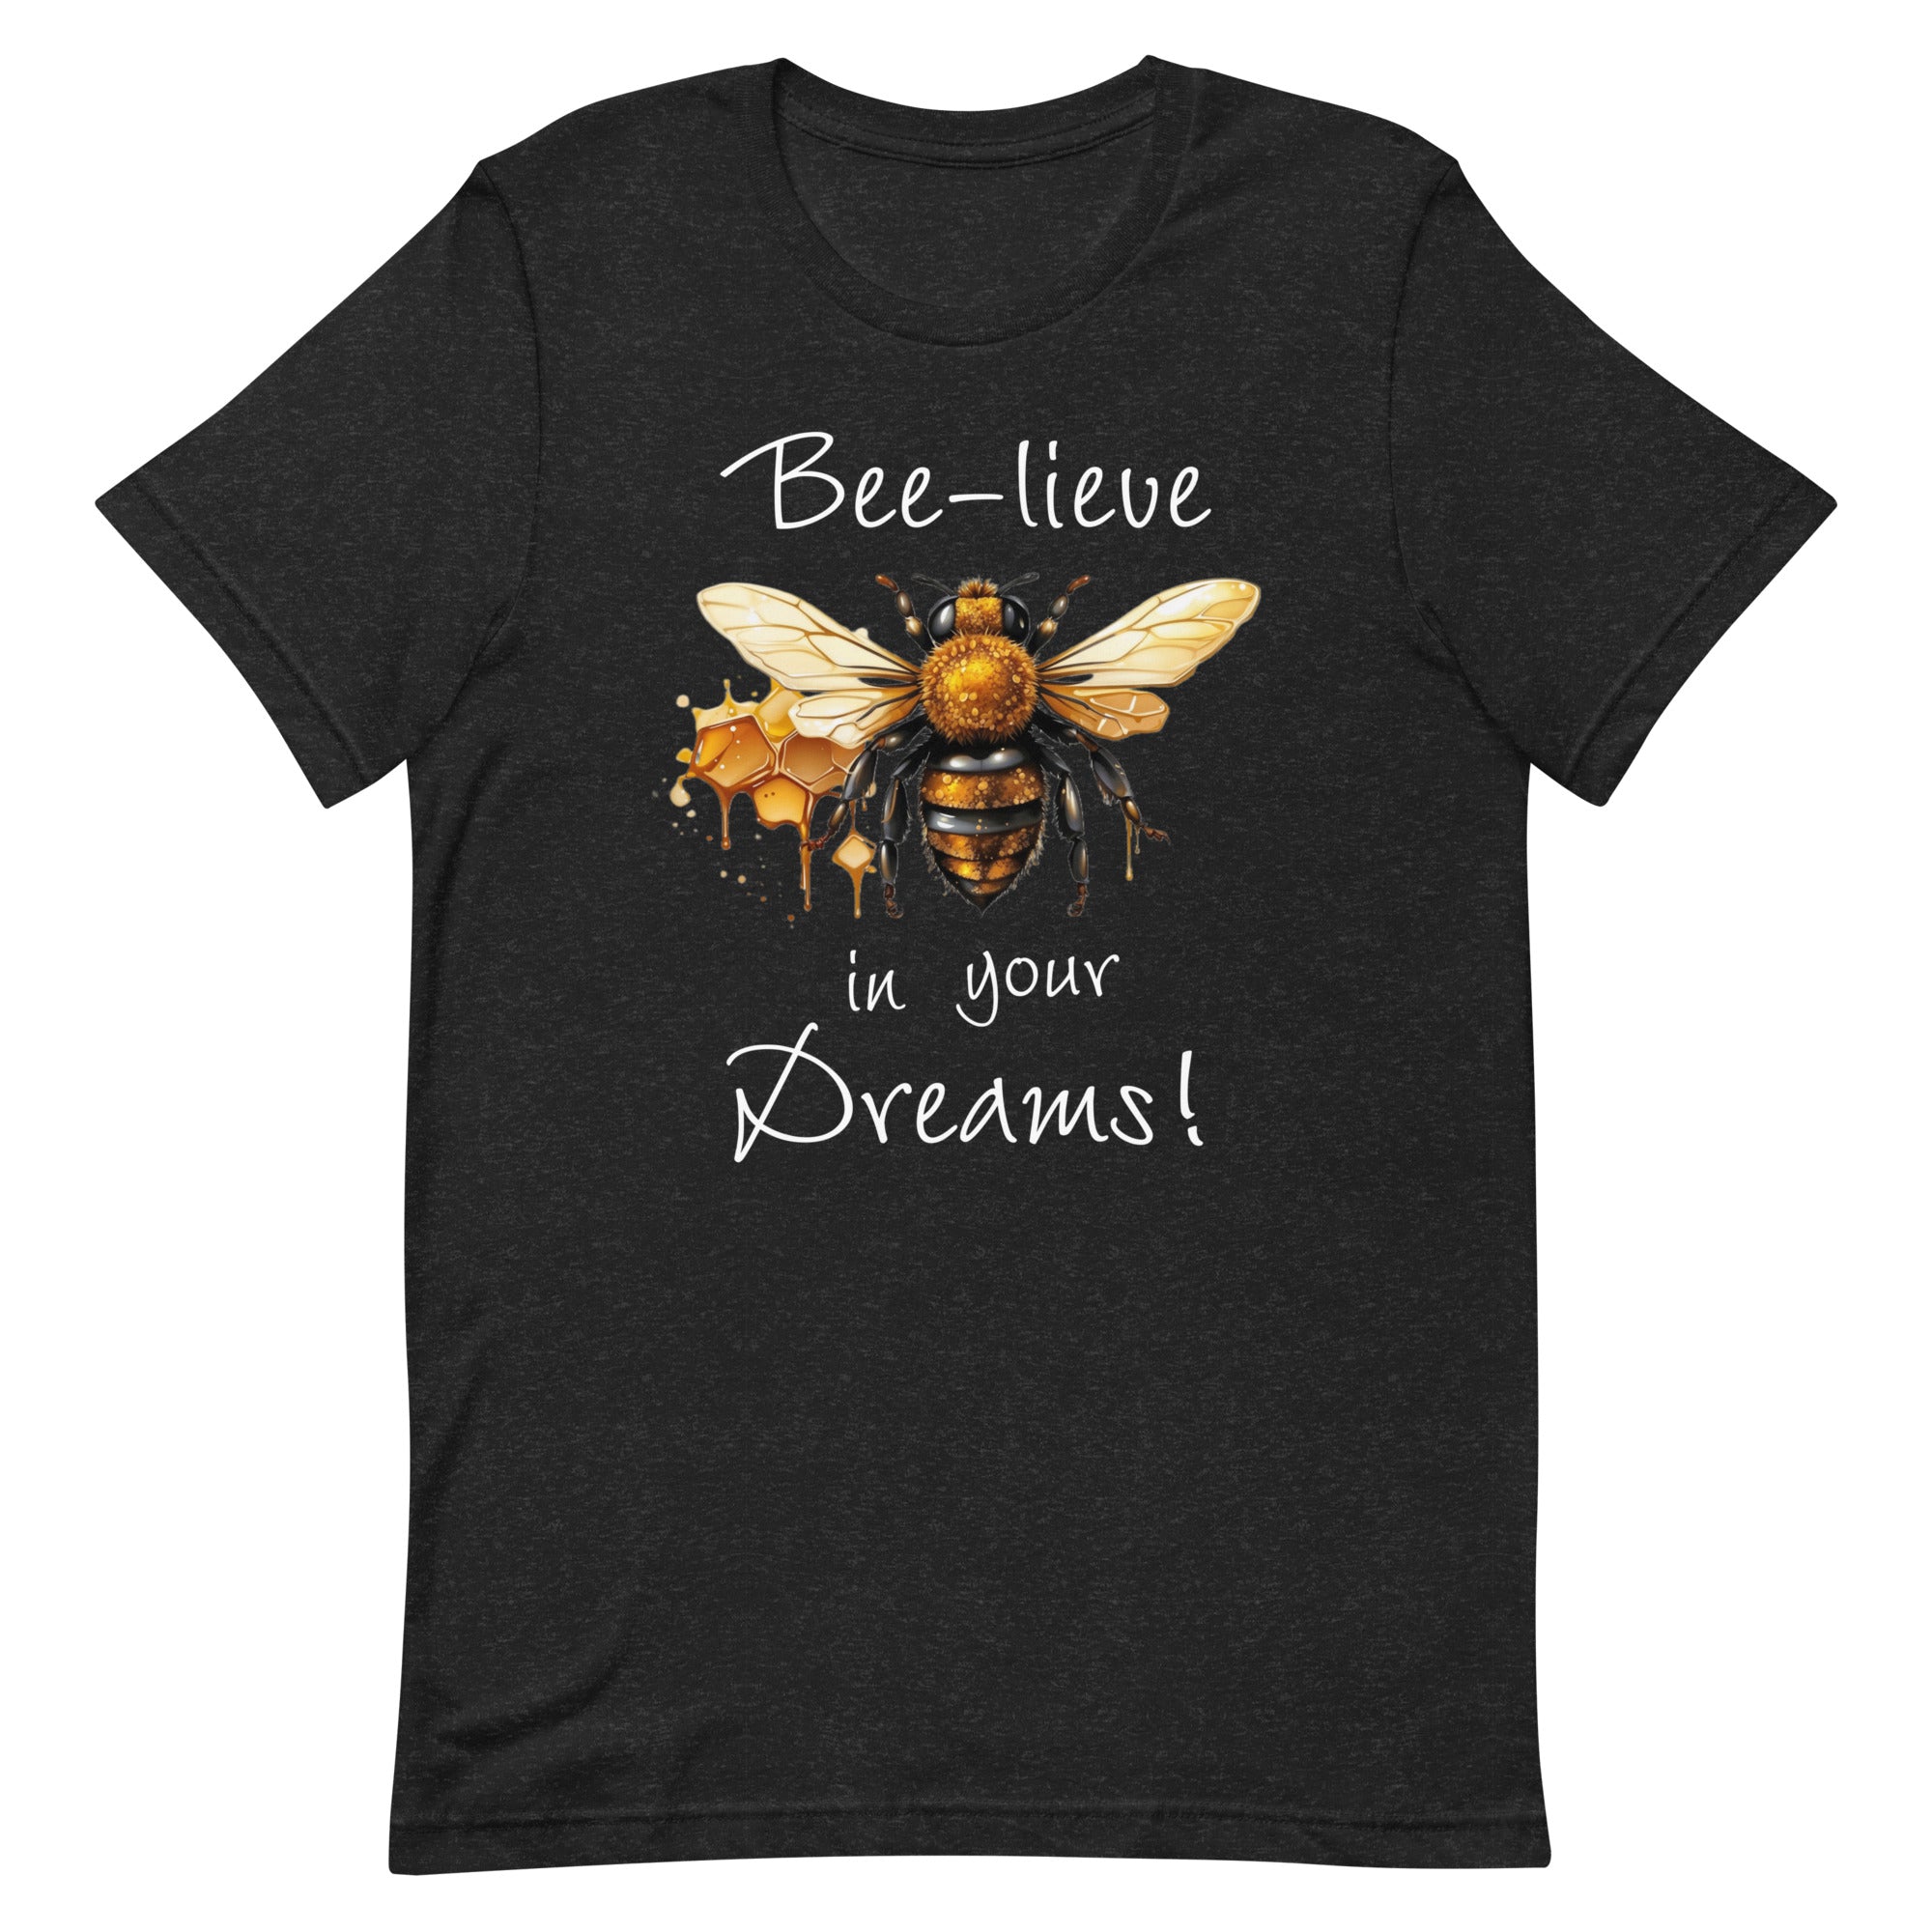 Bee-lieve in Your Dreams T-Shirt, Gift for Bee Lovers Black Heather XL M L S DenBox